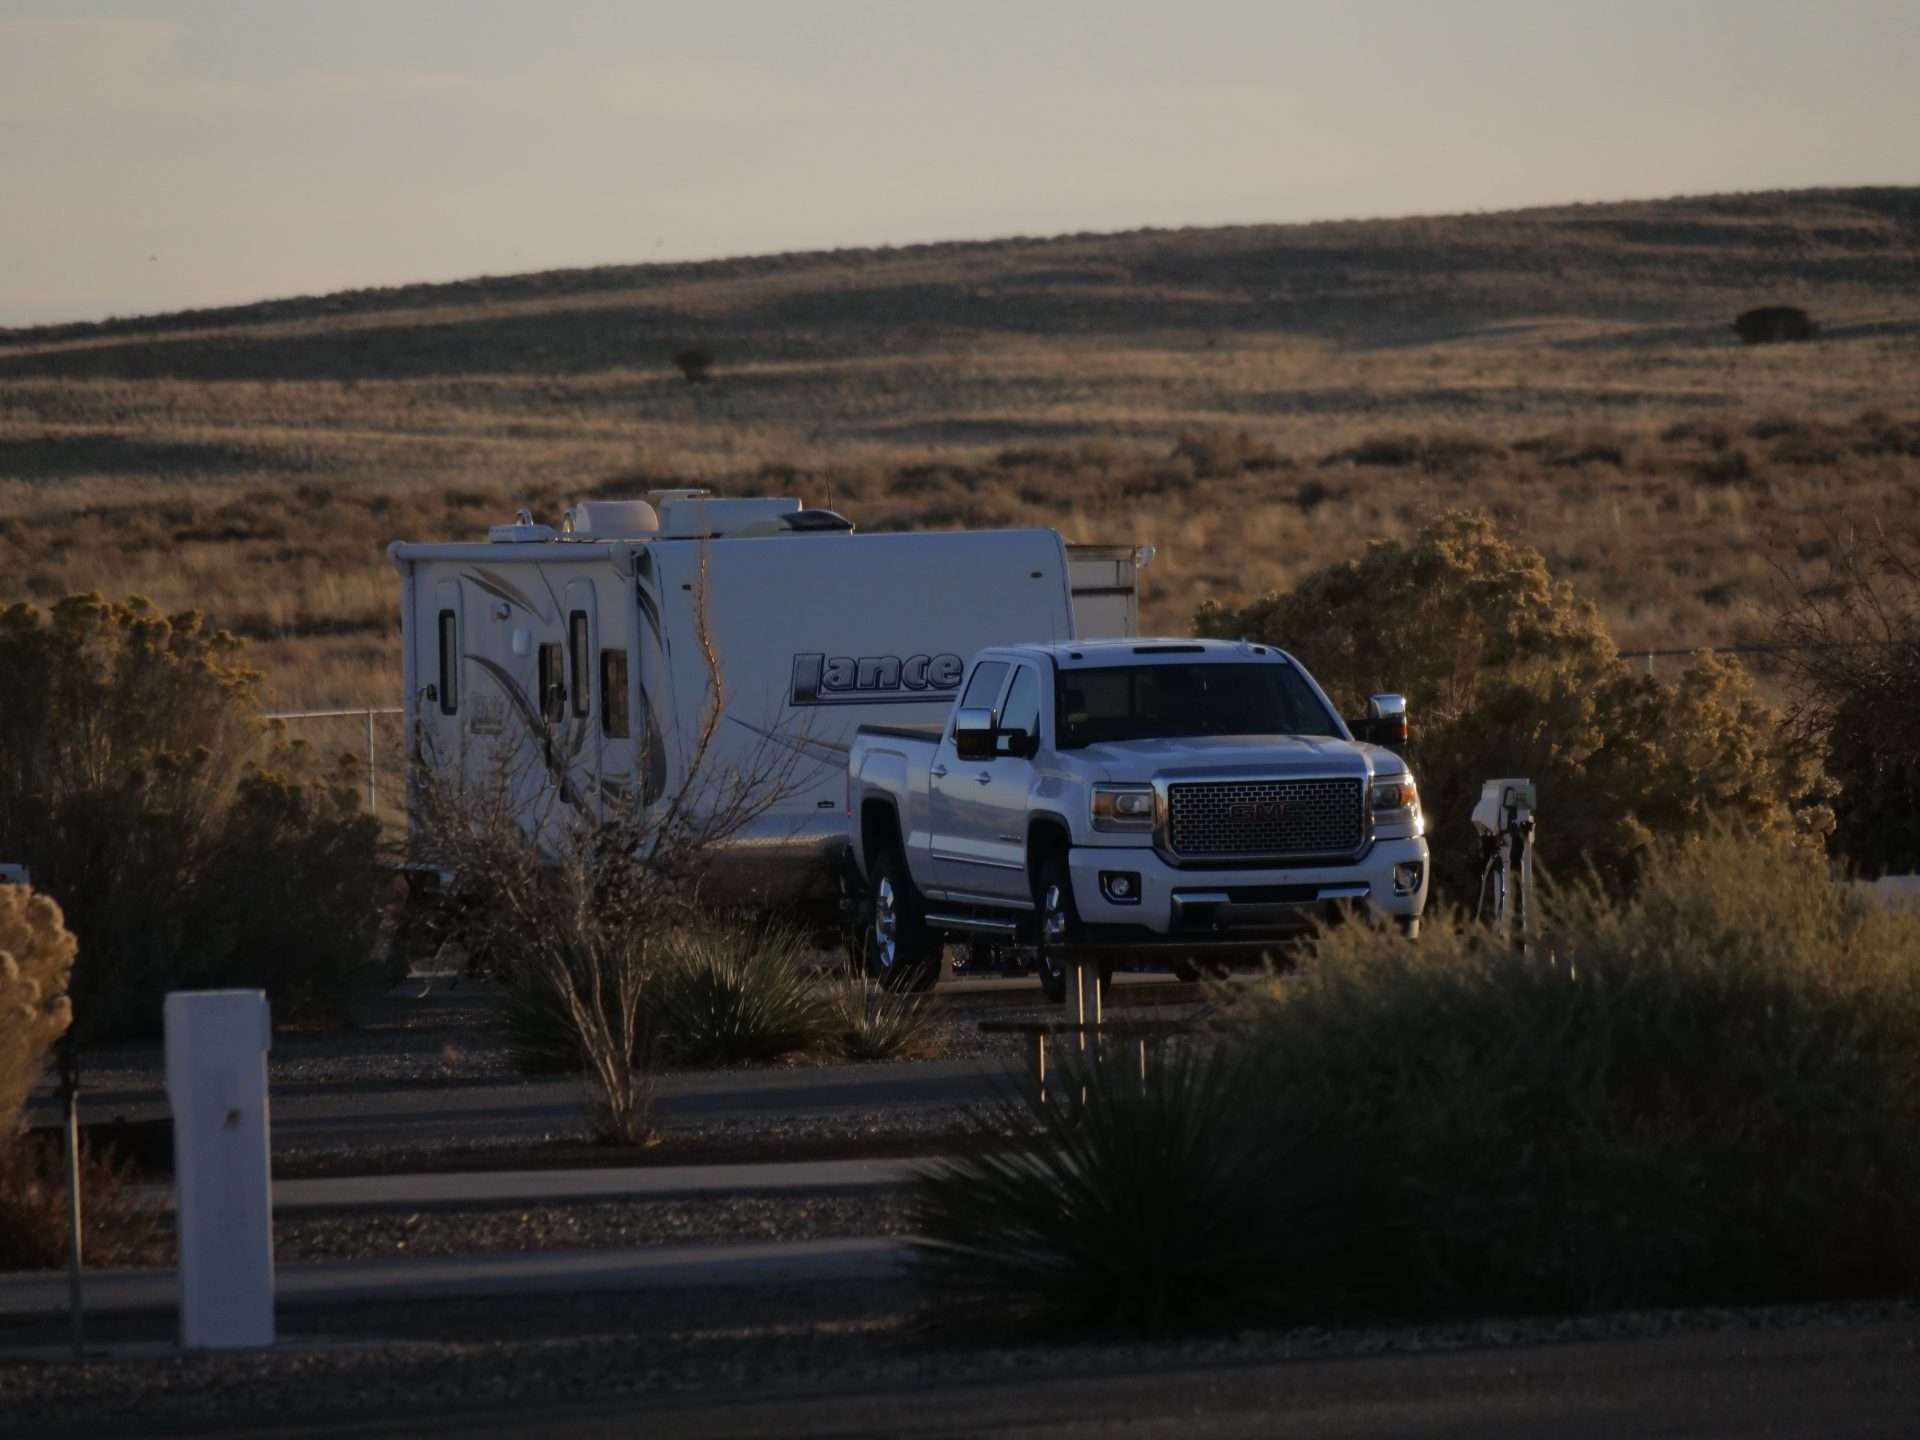 Lance travel trailer hitched to truck